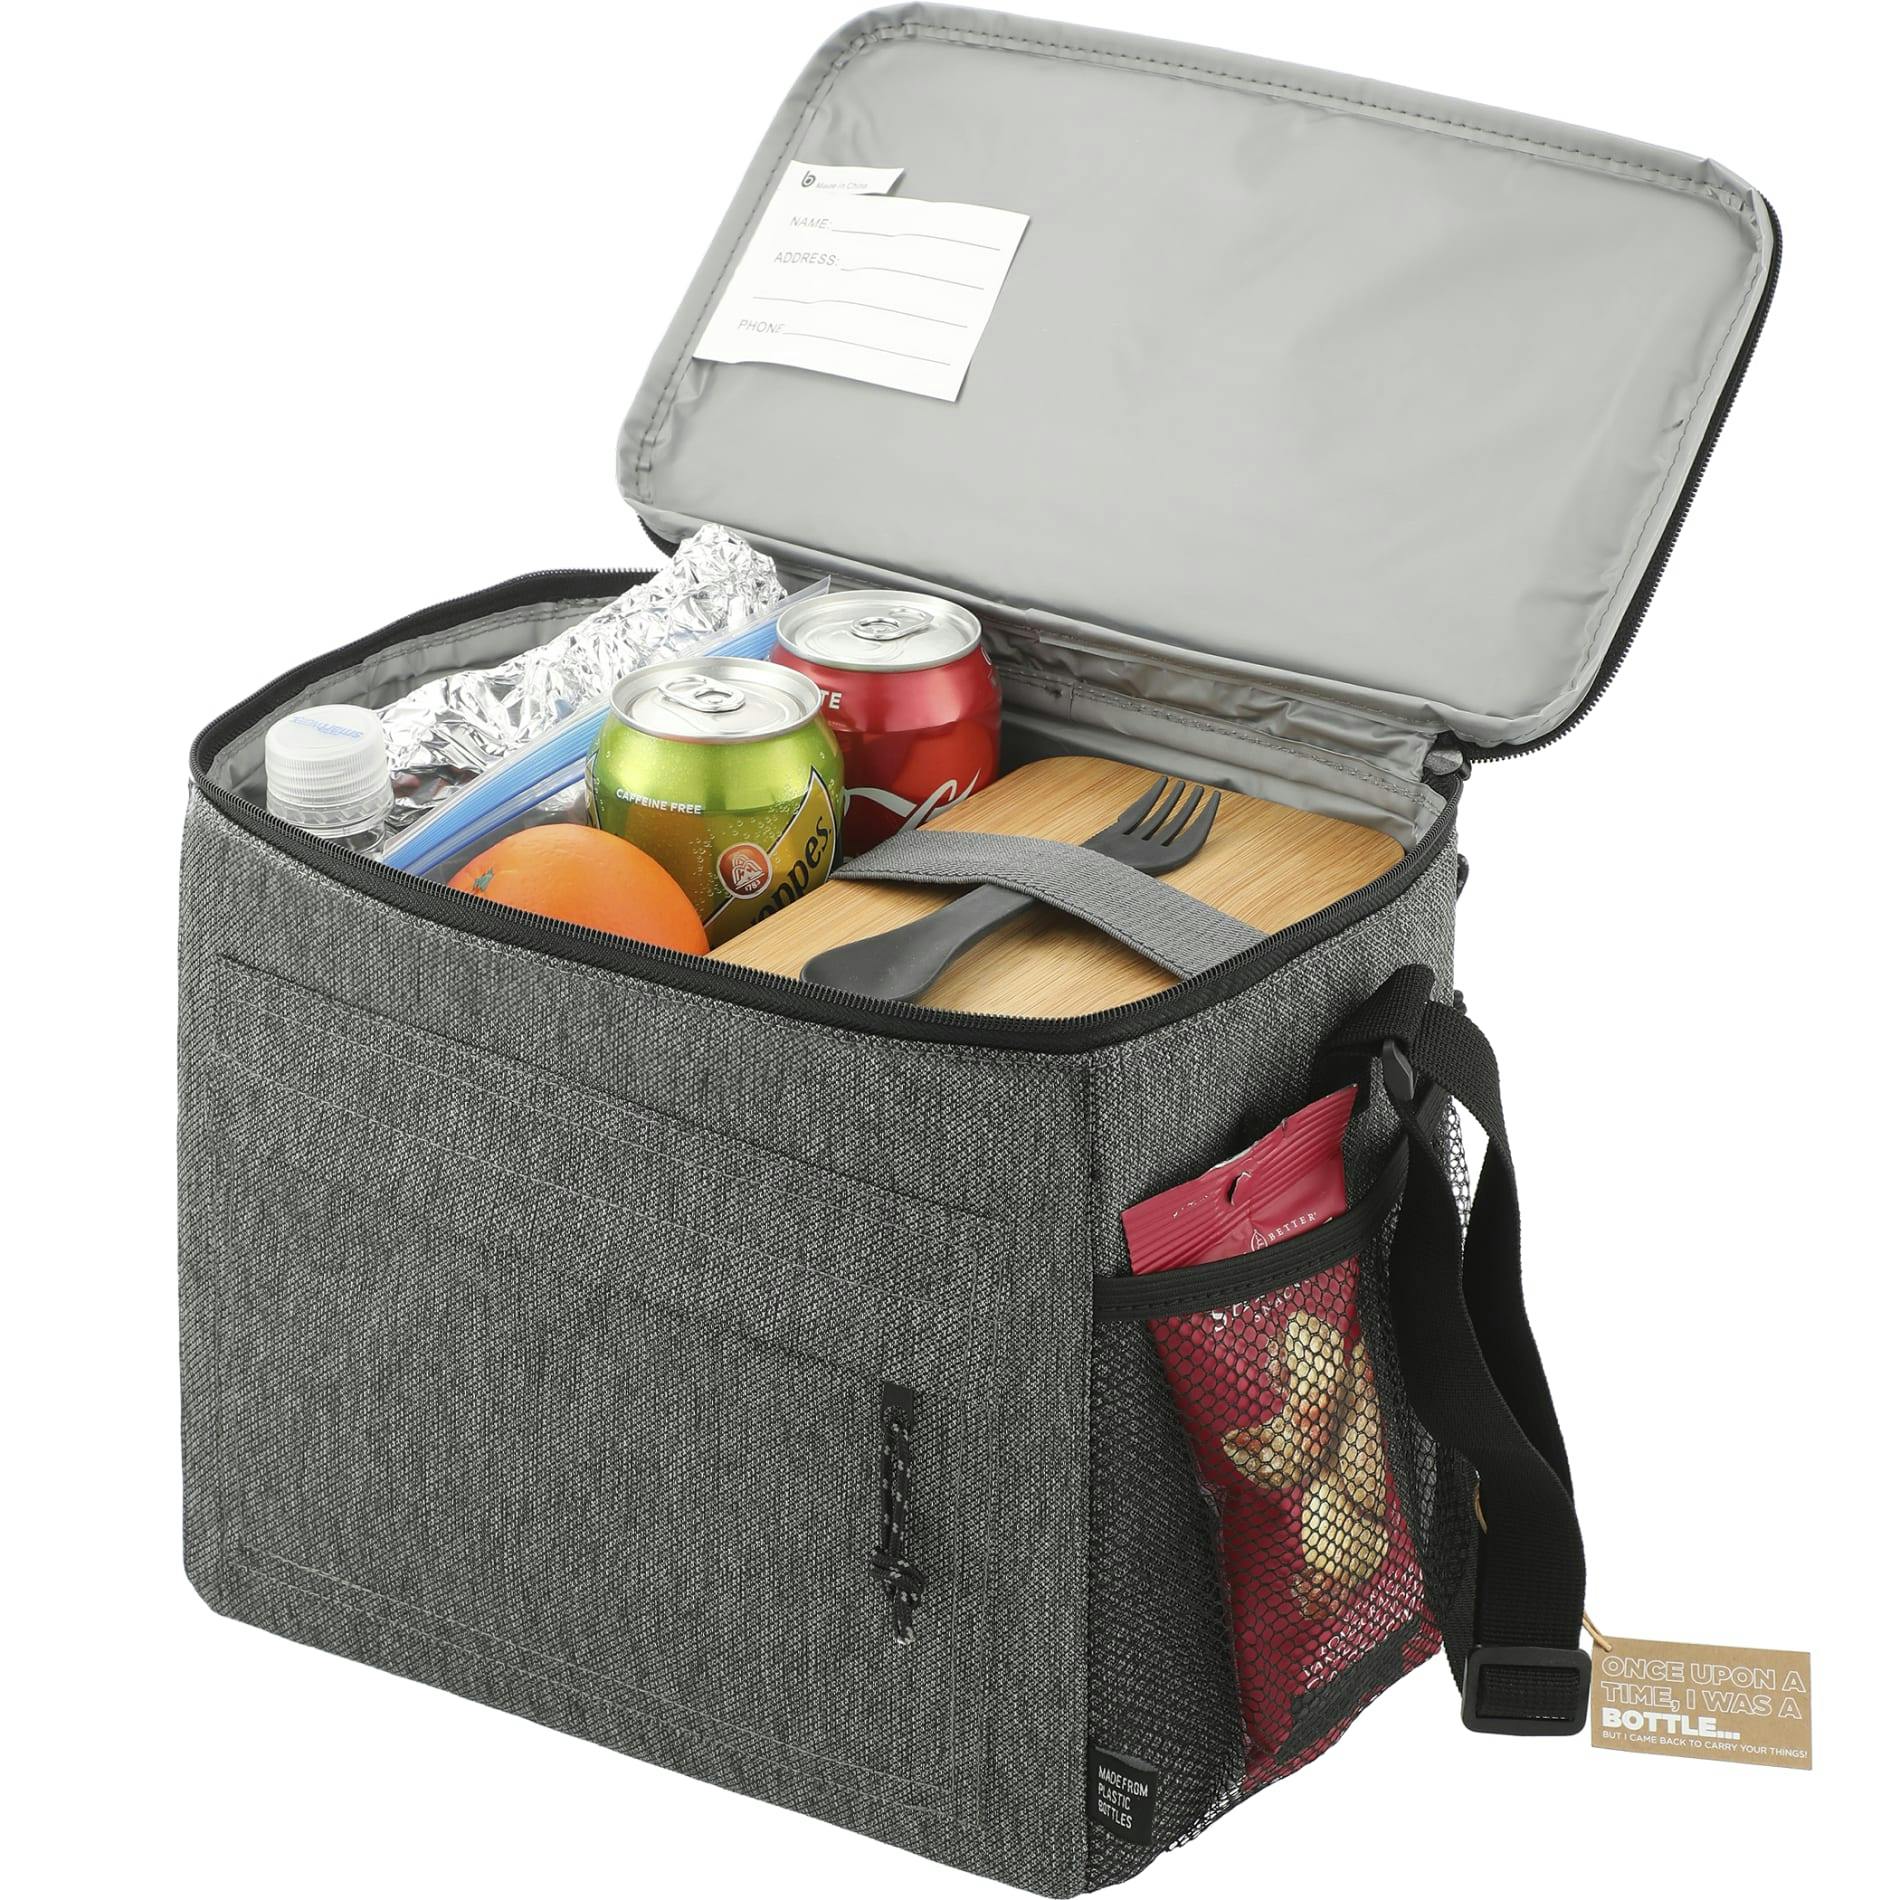 Vila Recycled 12 Can Lunch Cooler - additional Image 3